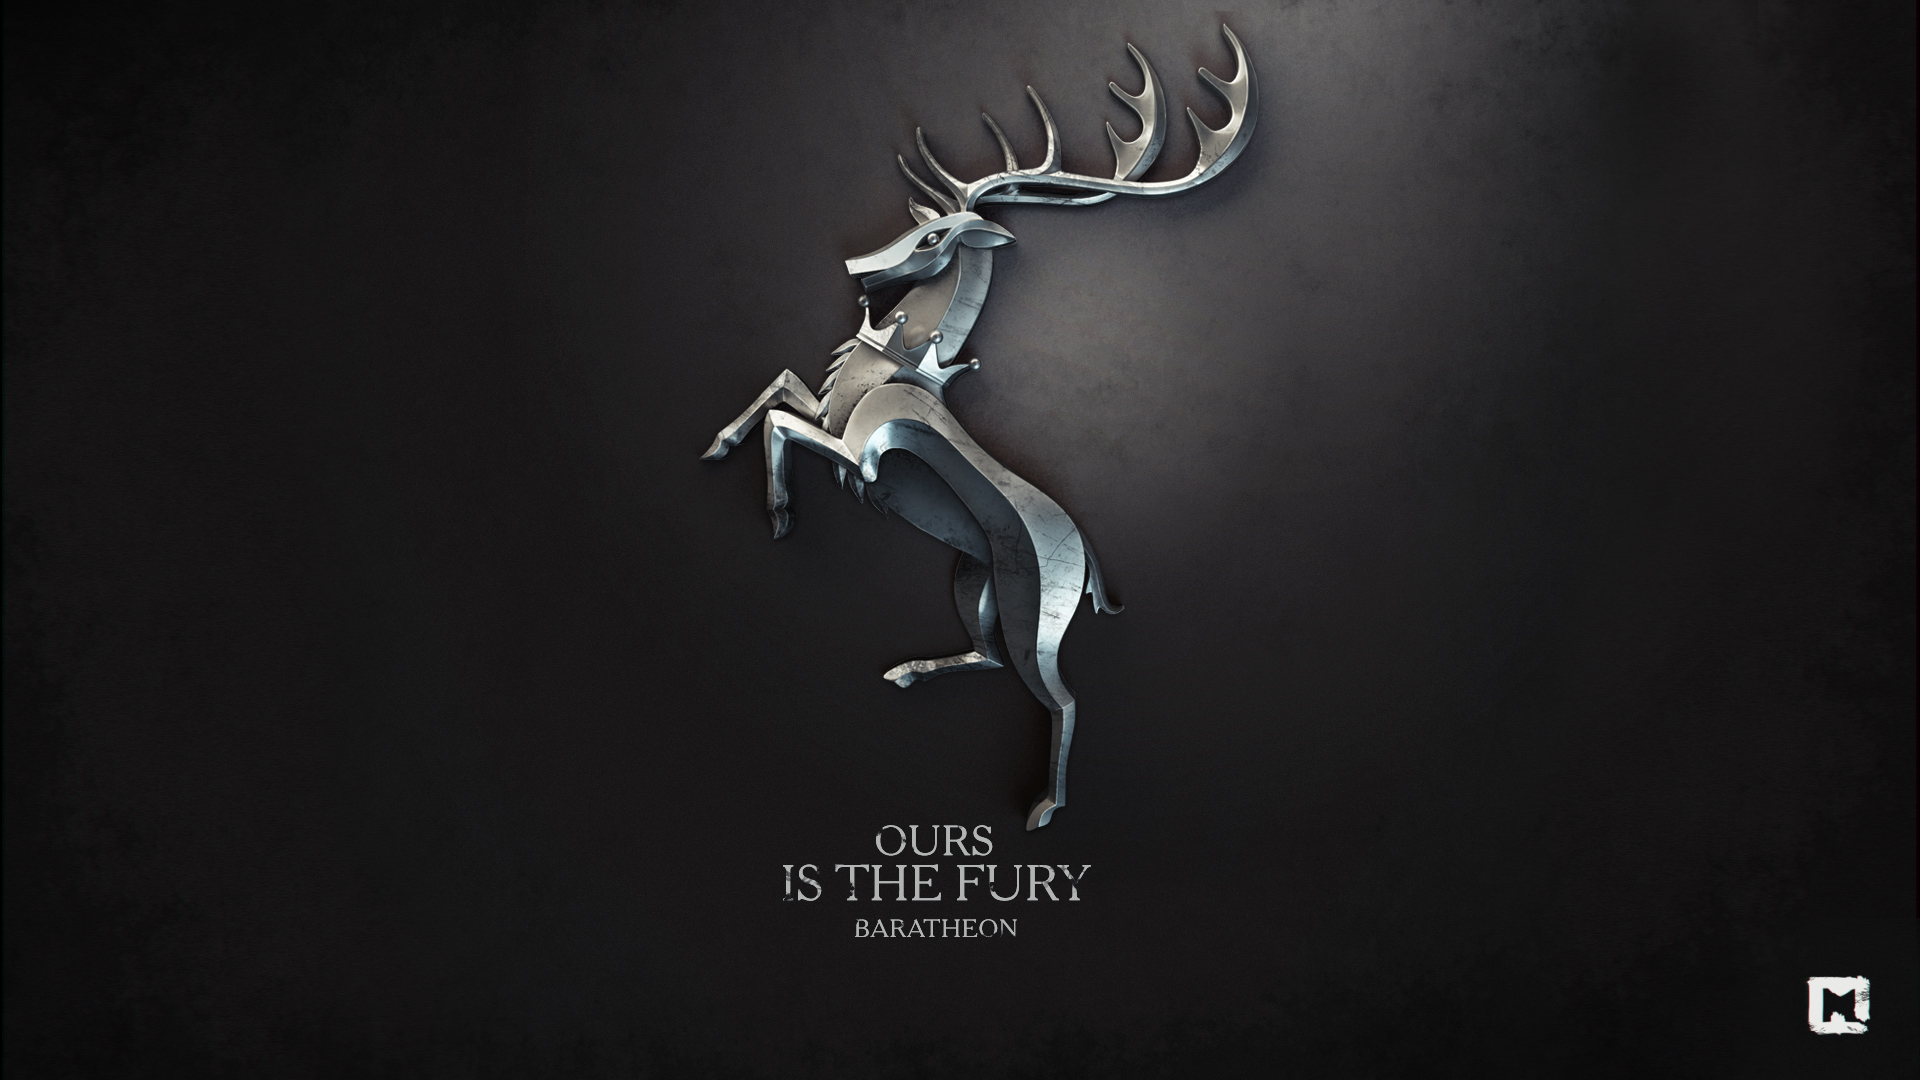 Game Of Thrones Wallpapers On Behance